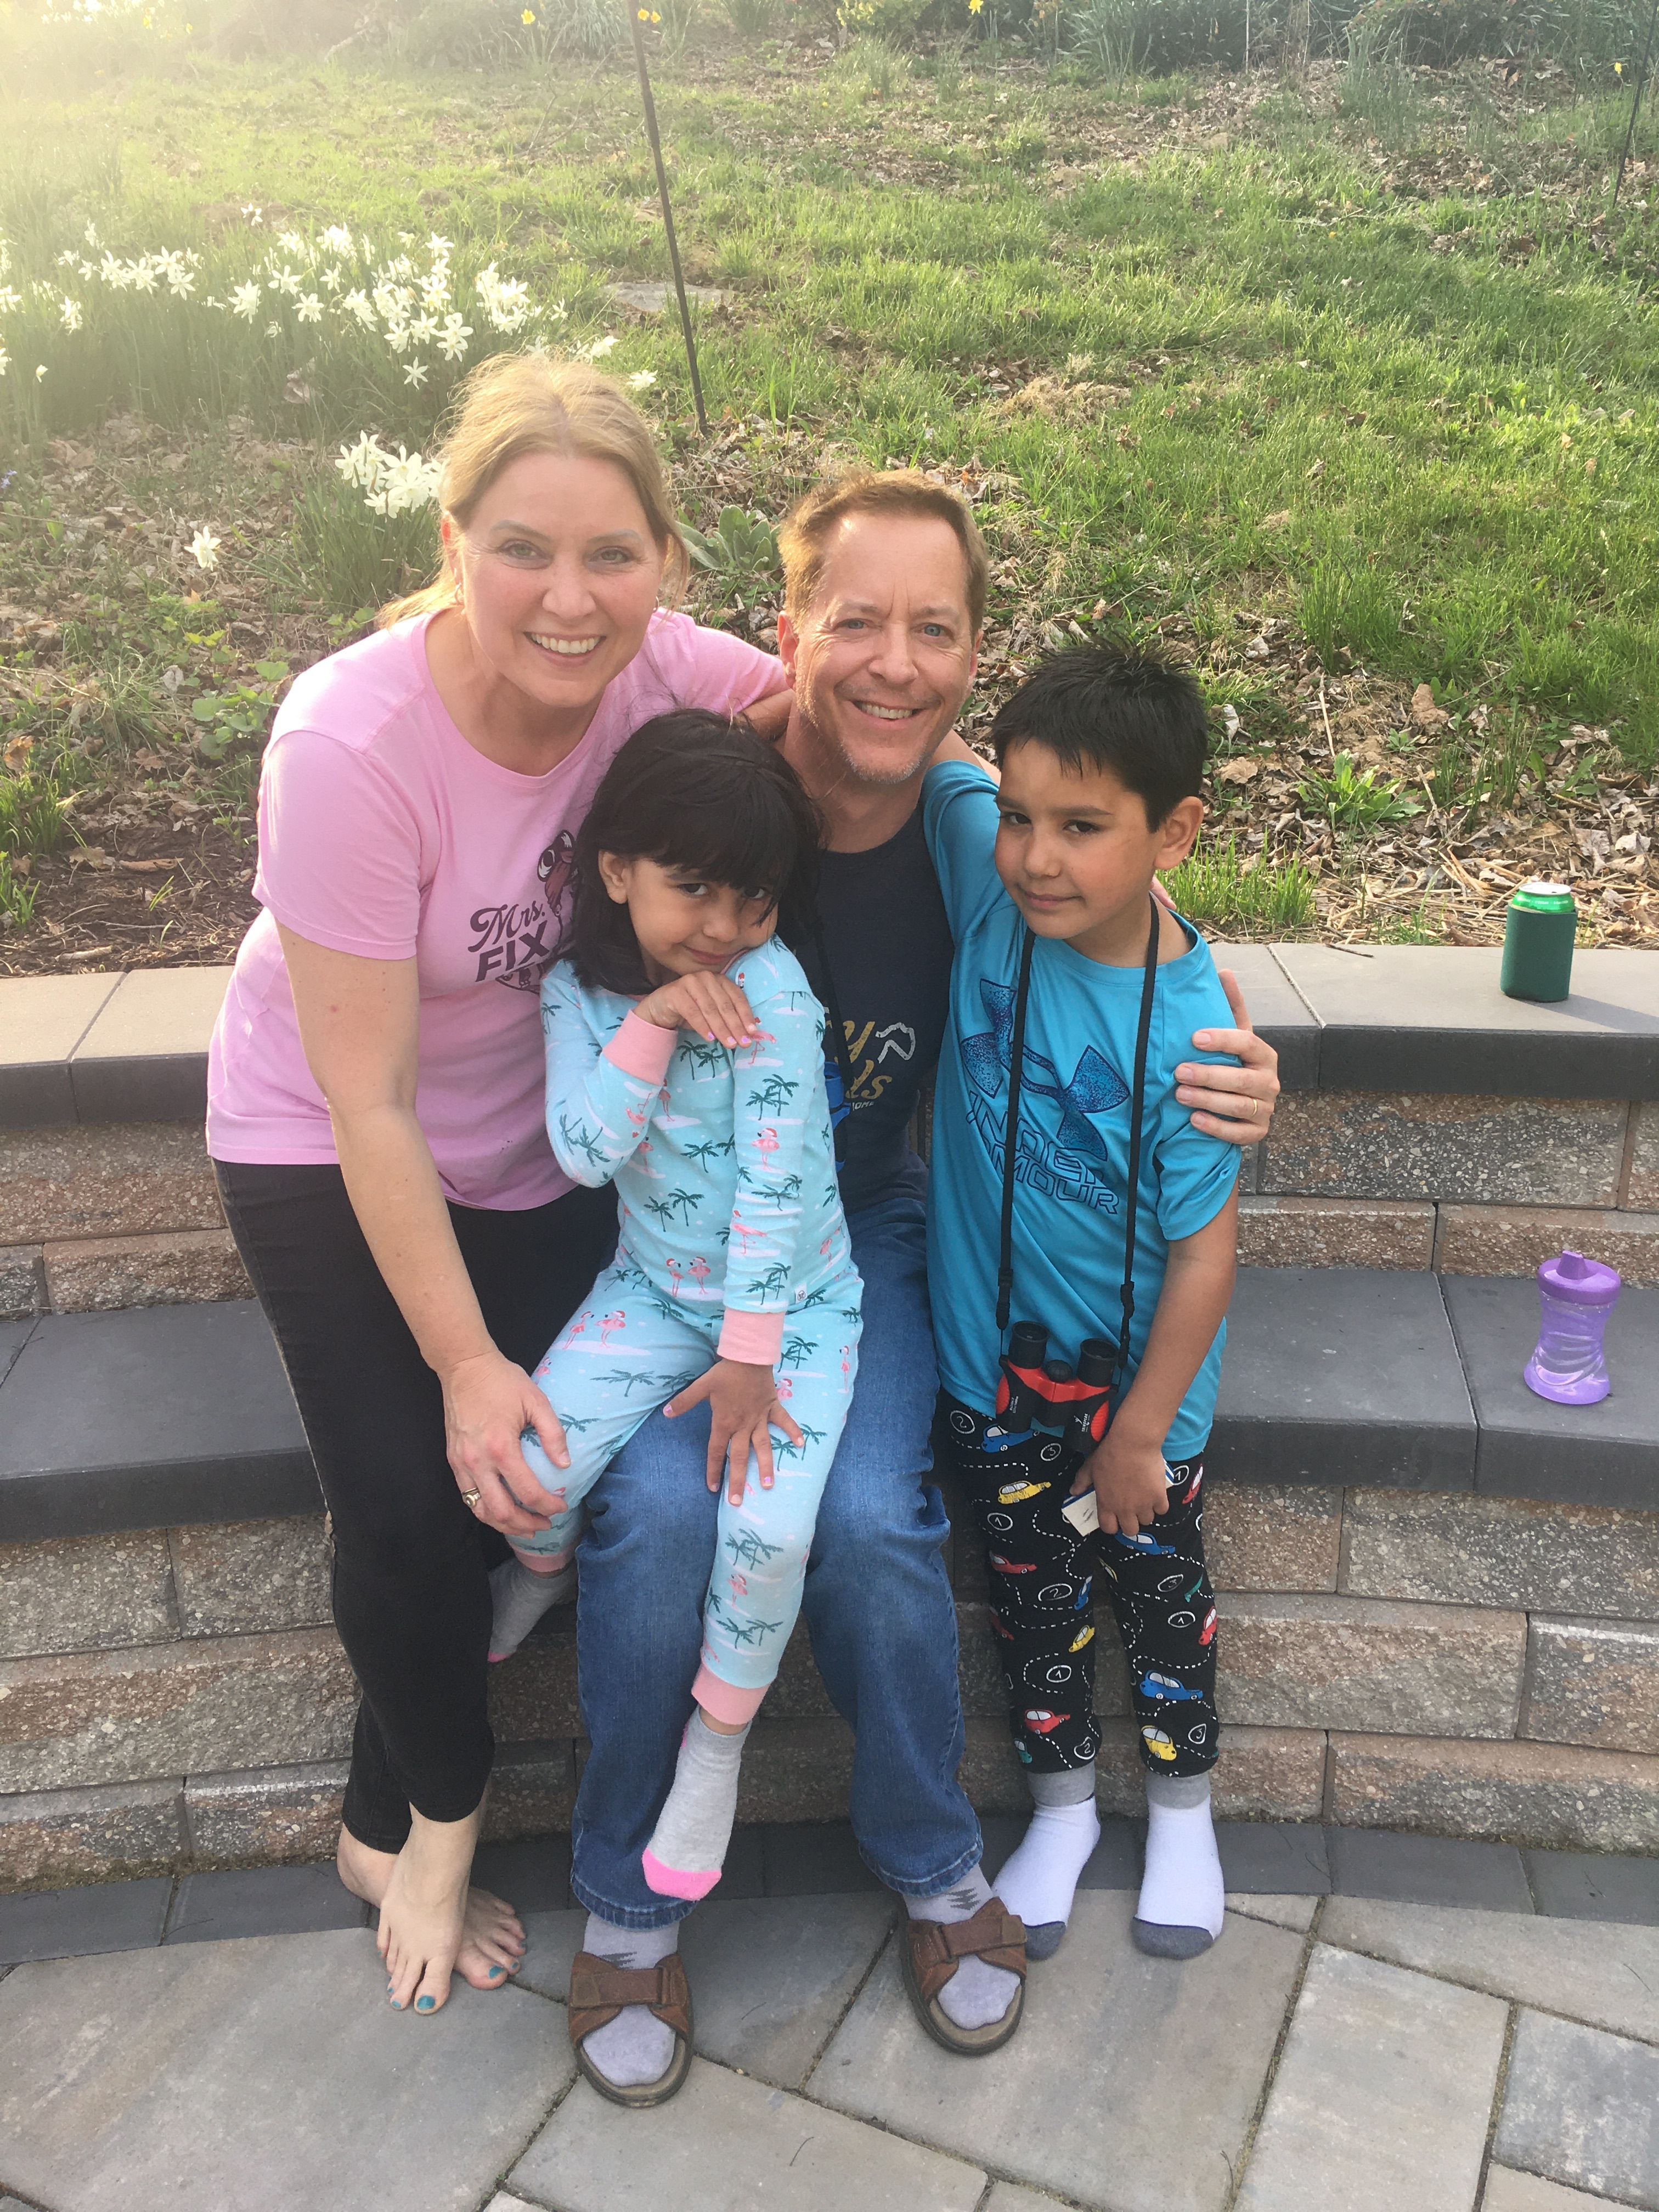 Medtronic employee Todd Gillenwater and his family